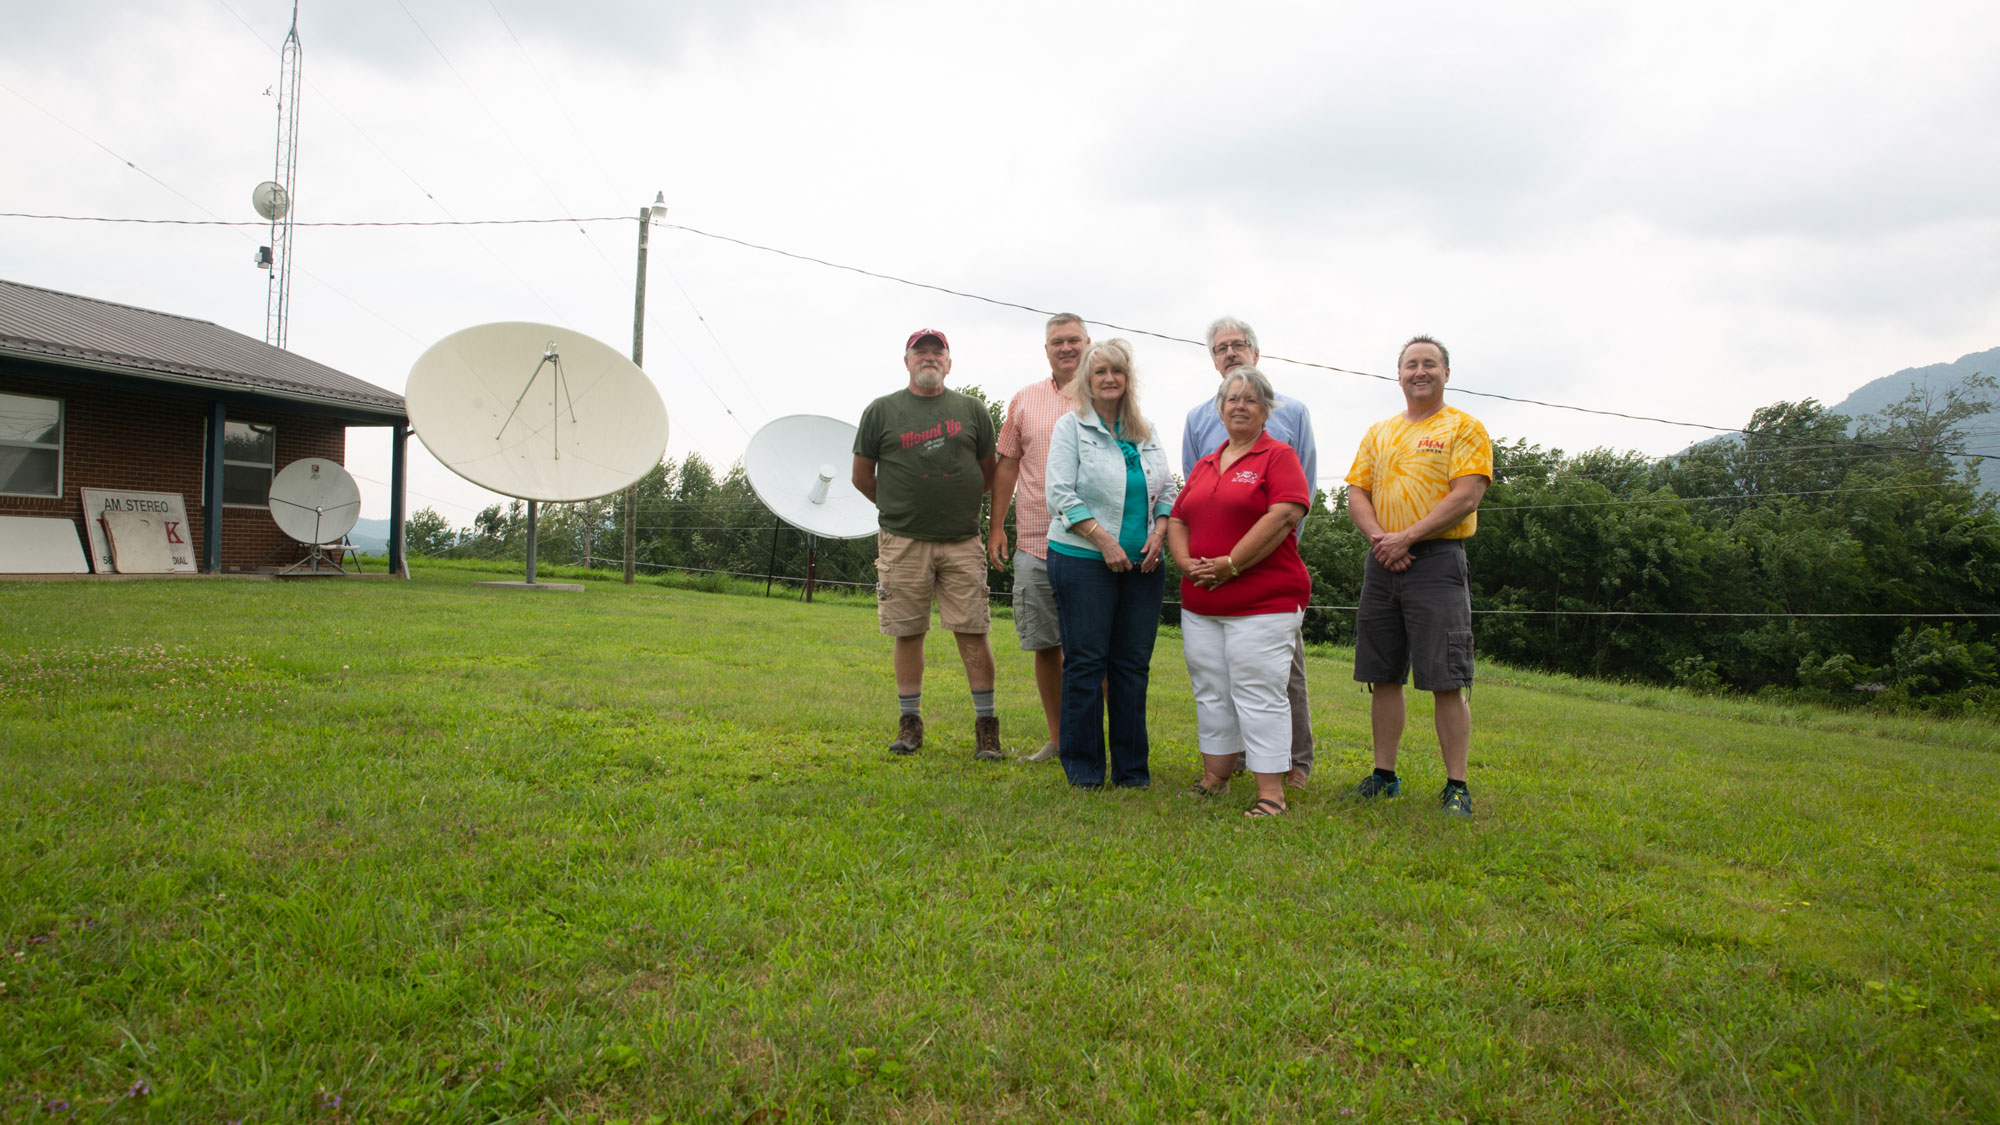 A group of six stands in a field in front of large satellite dishes